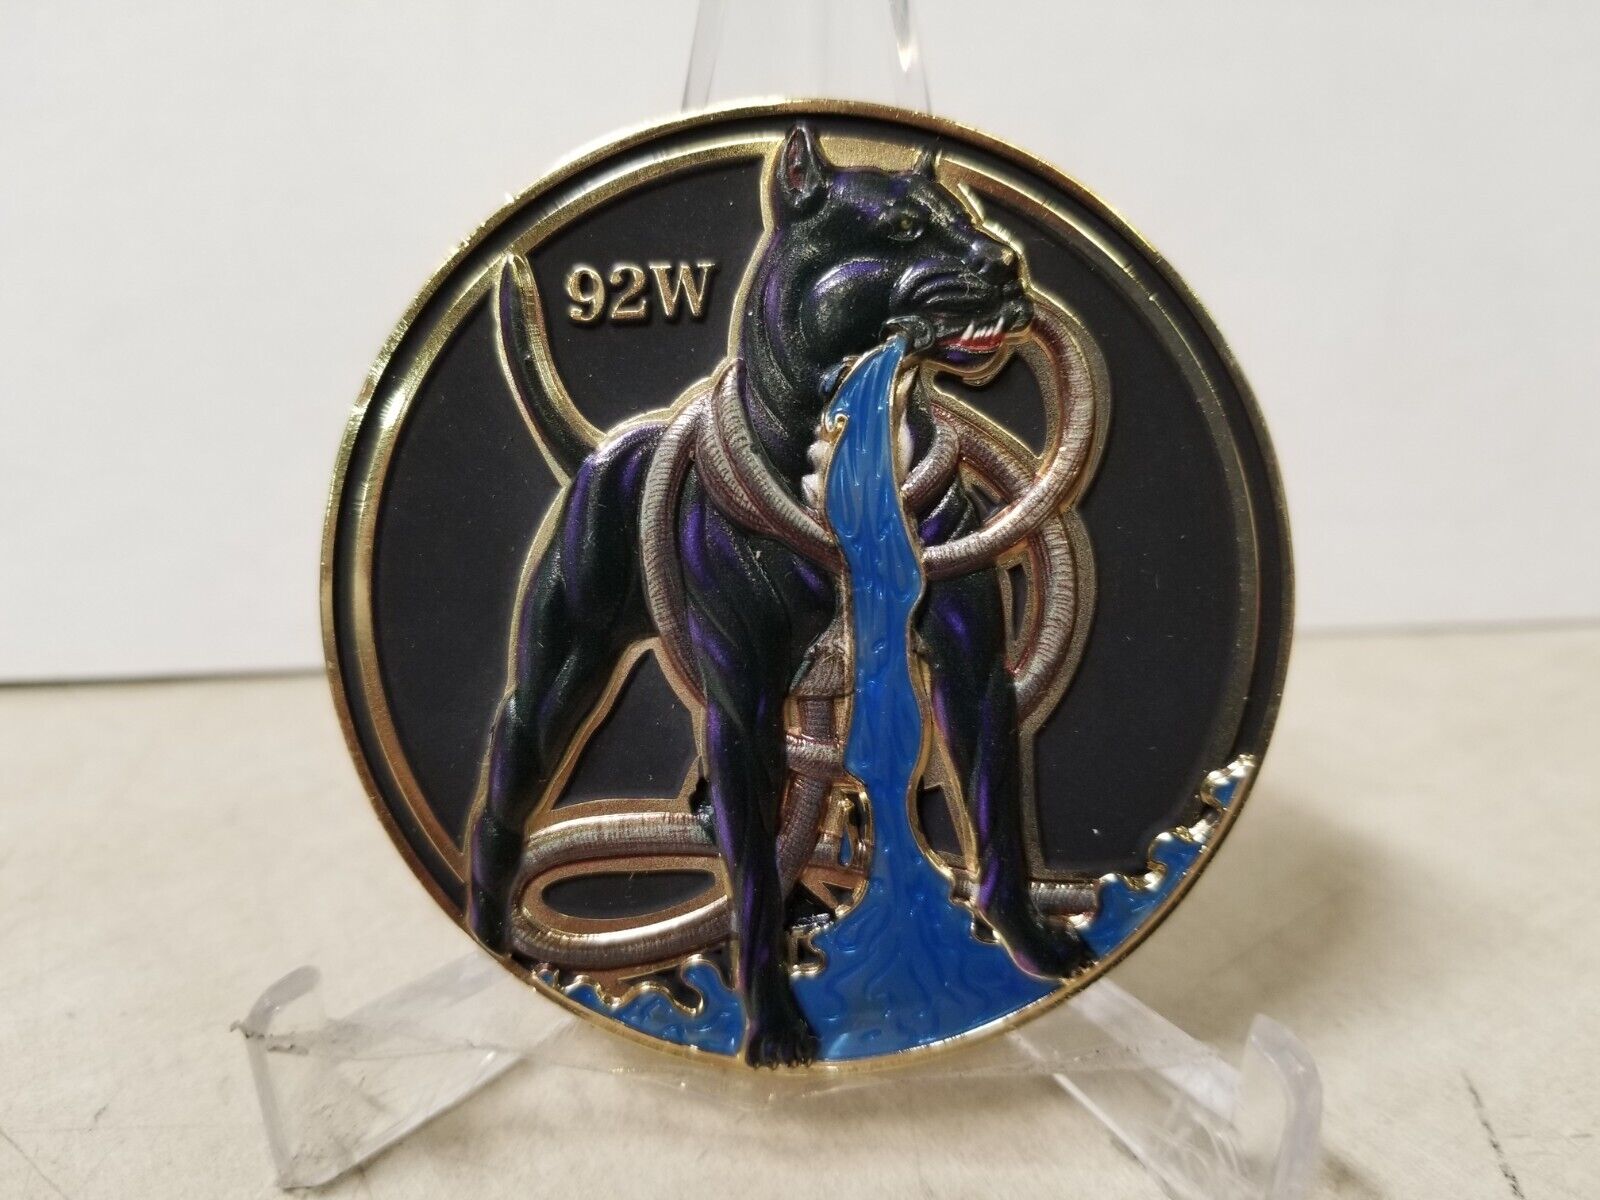 Presented For Excellence Waterdawgs Lead The Way 92W Challenge Coin